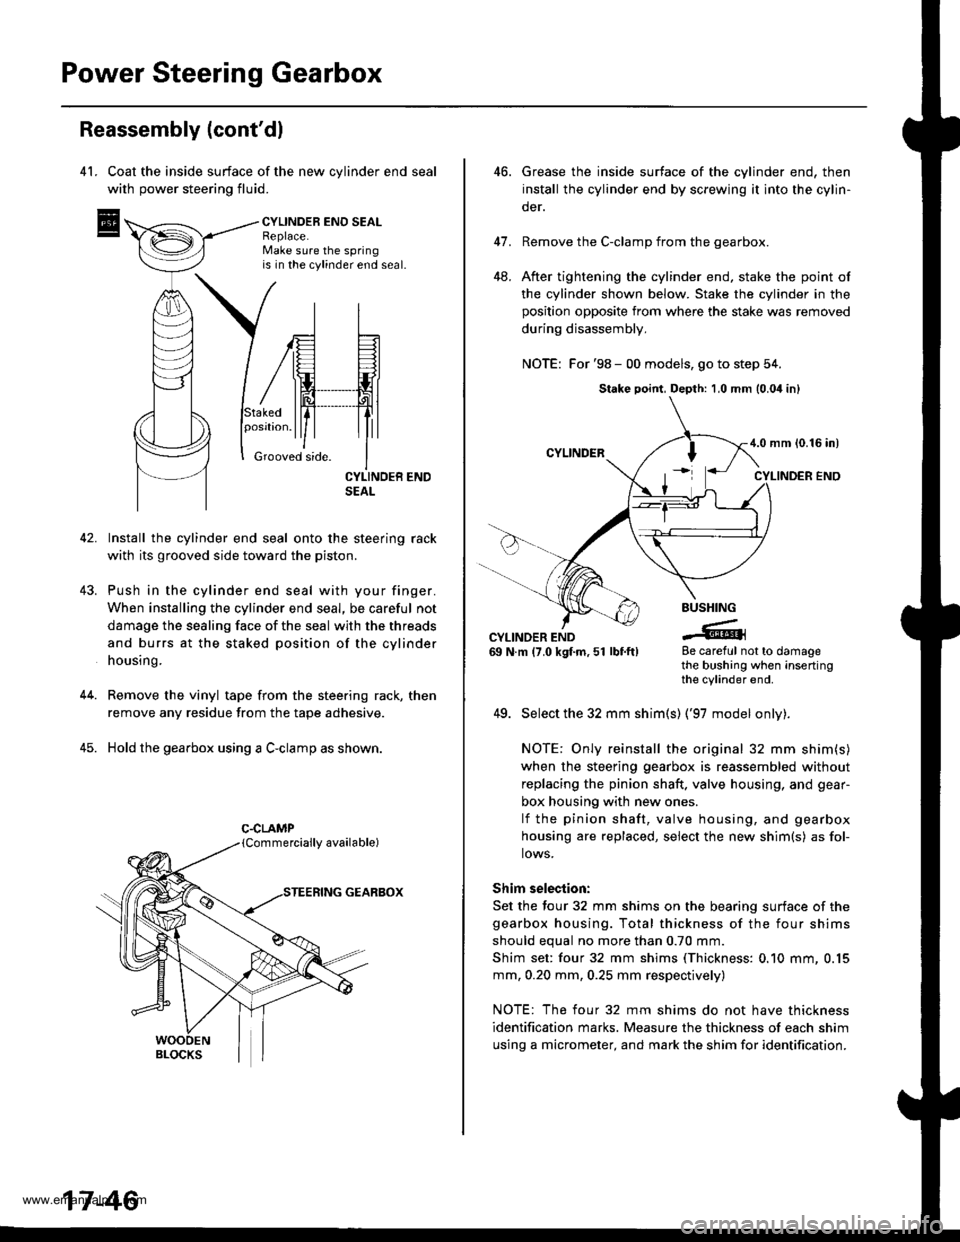 HONDA CR-V 1998 RD1-RD3 / 1.G Owners Manual 
Power Steering Gearbox
Reassembly (contdl
4l. Coat the inside surface of the new cvlinder end seal
with power steering fluid.
CYLINDEB ENO SEALReplace.Make sure the springis in the cylinder end seal